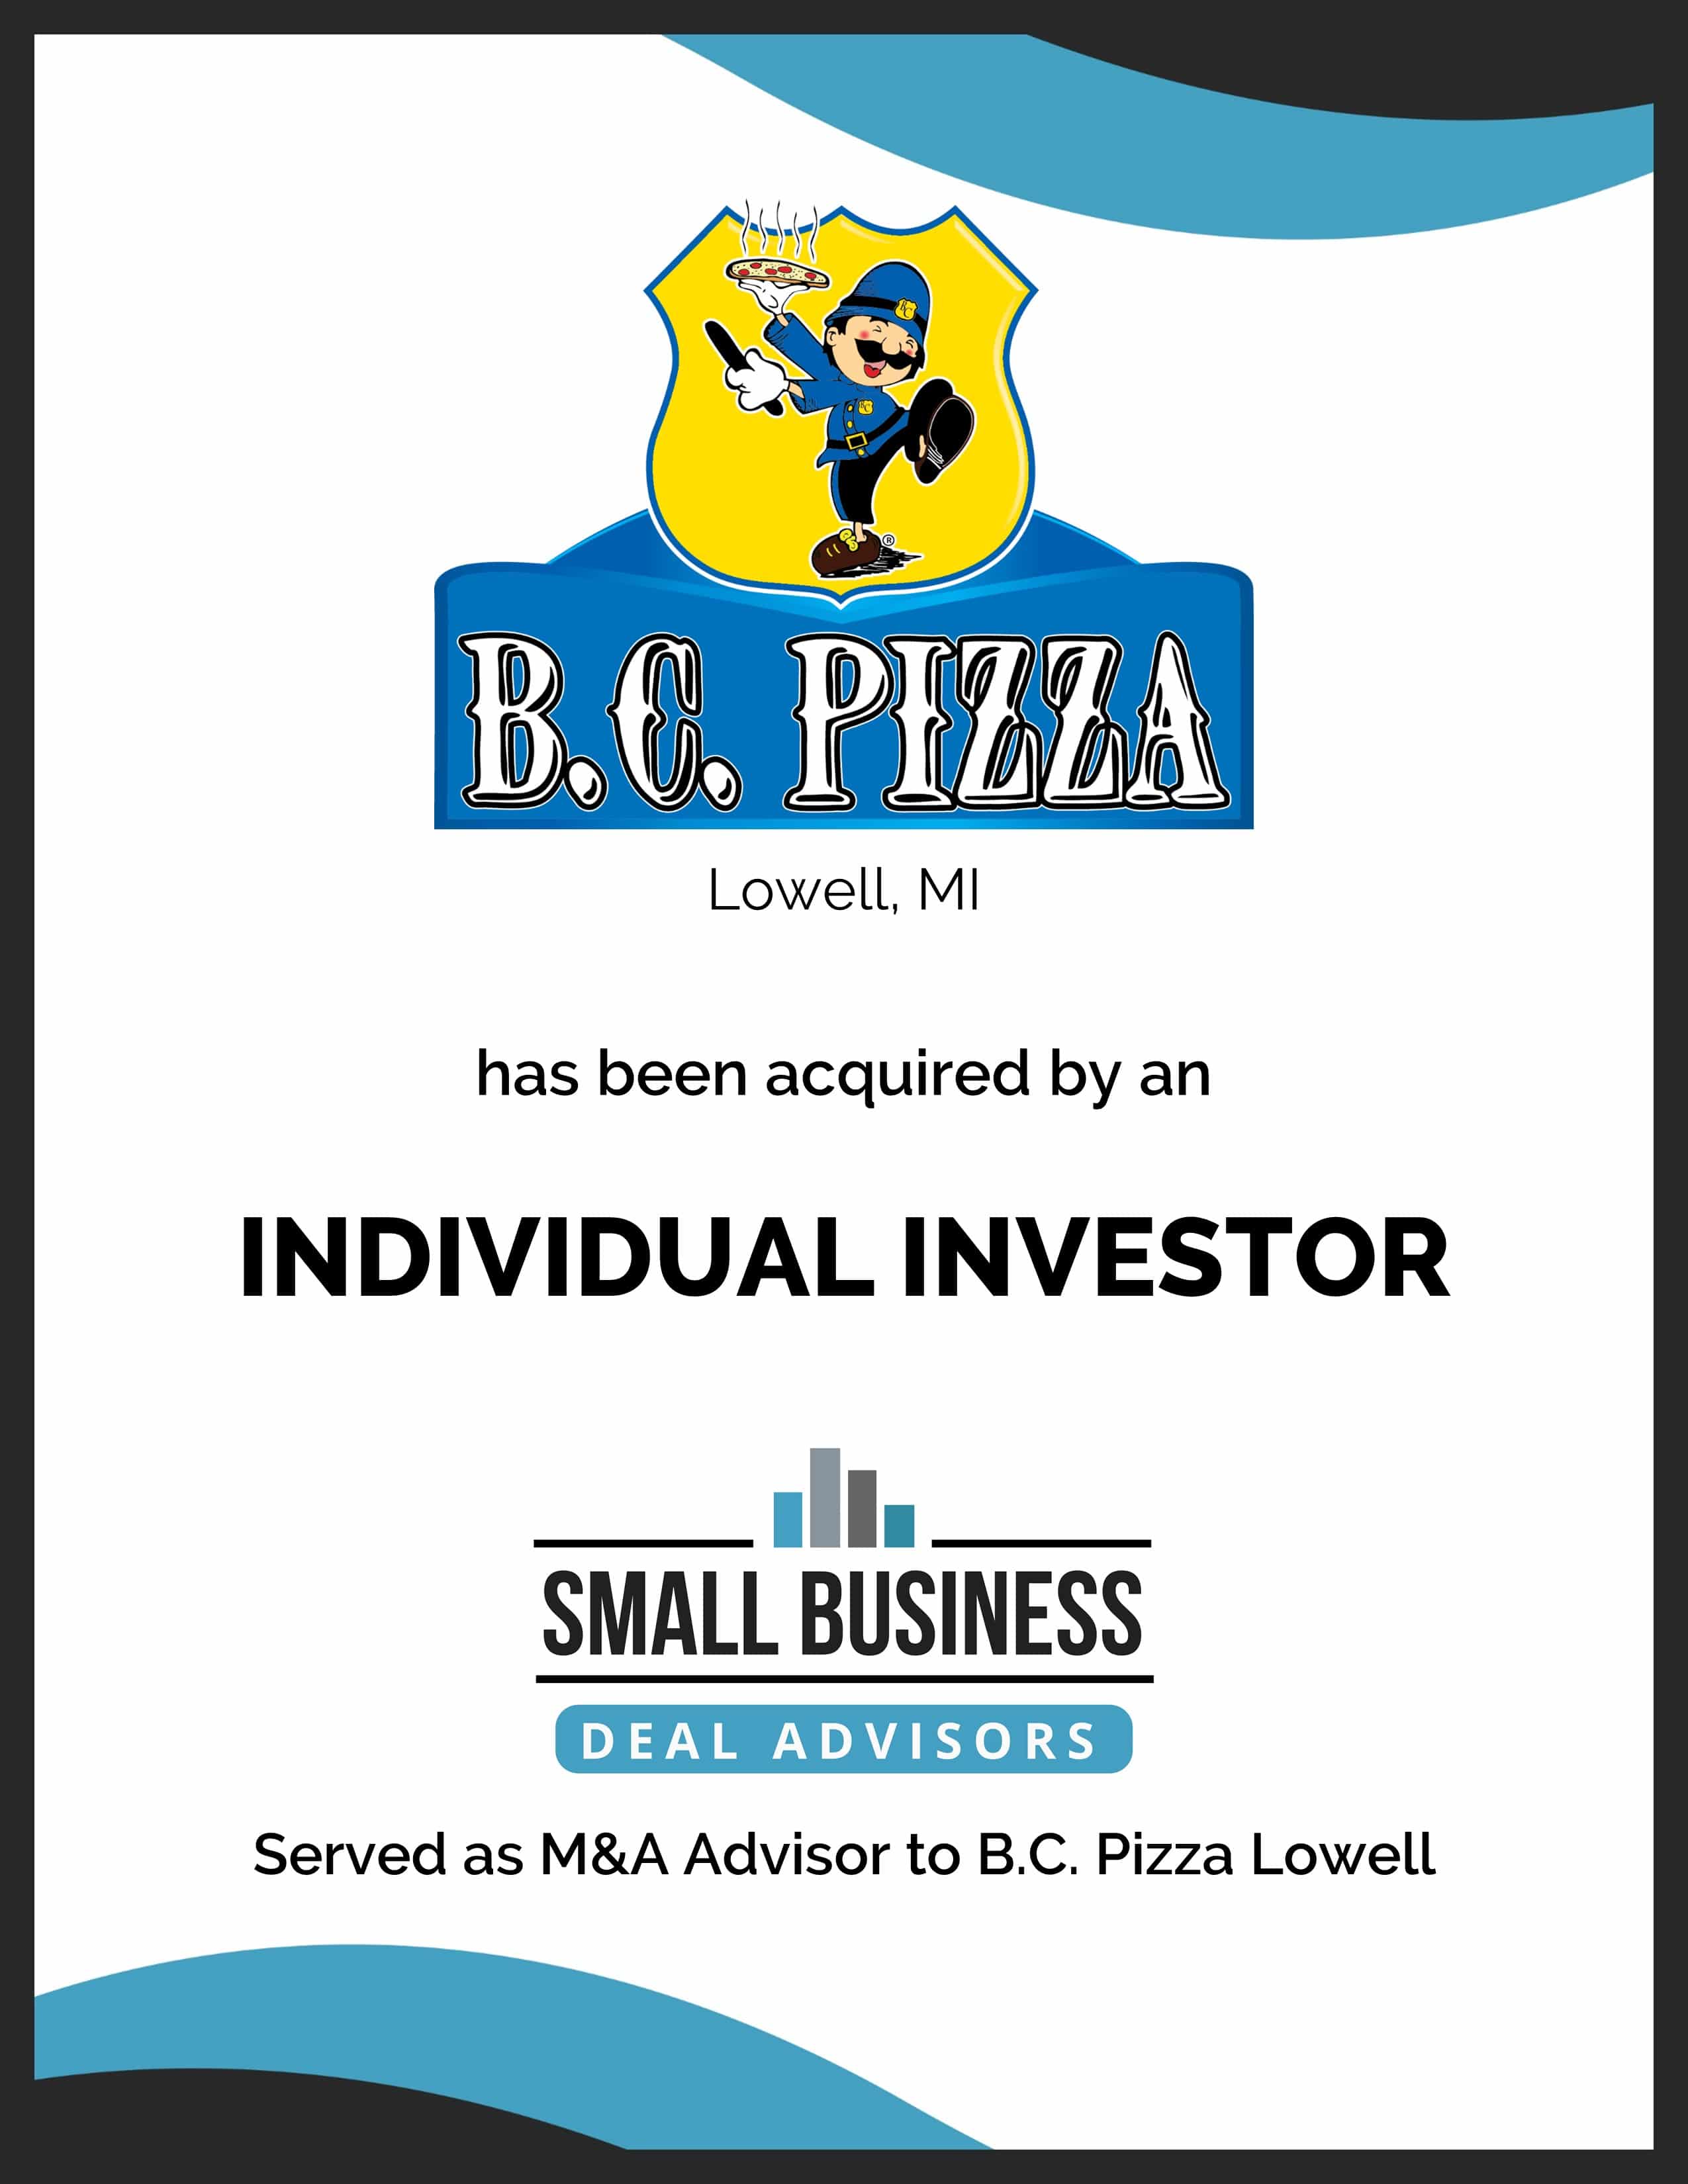 B.C. Pizza of Lowell